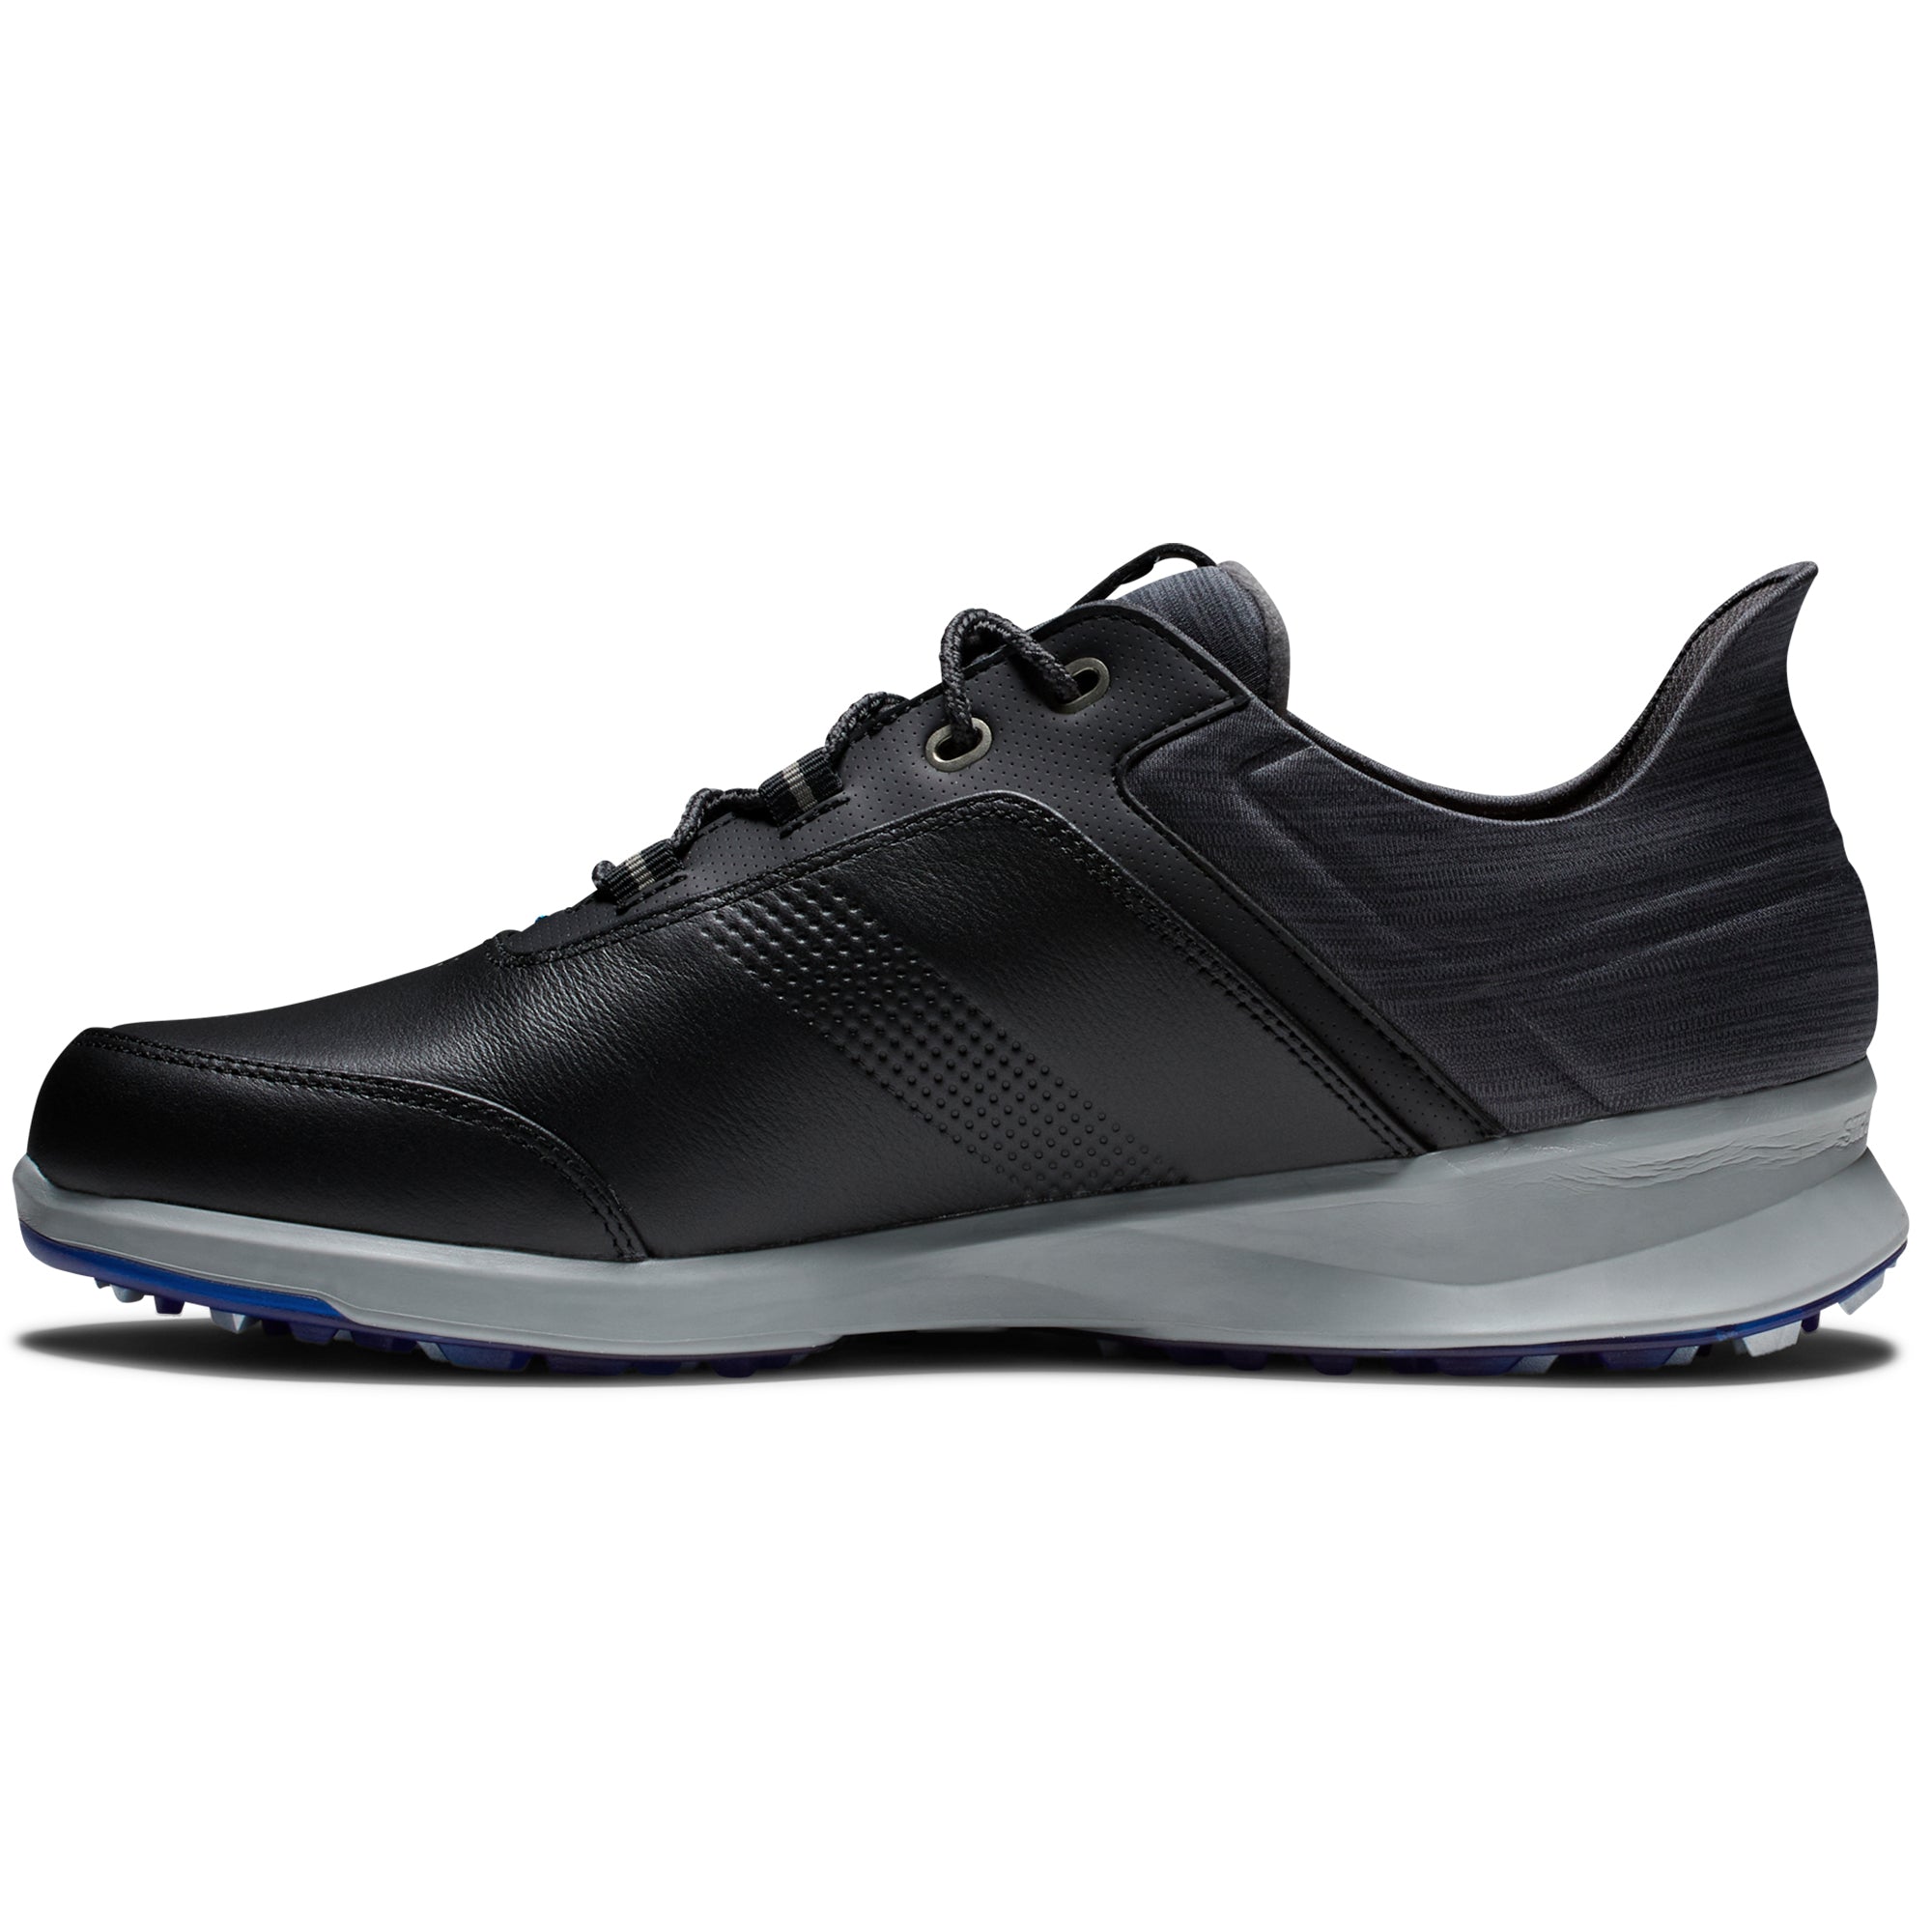 FootJoy Stratos Golf Shoes 50078 Black Charcoal Blue Jay | Function18 ...